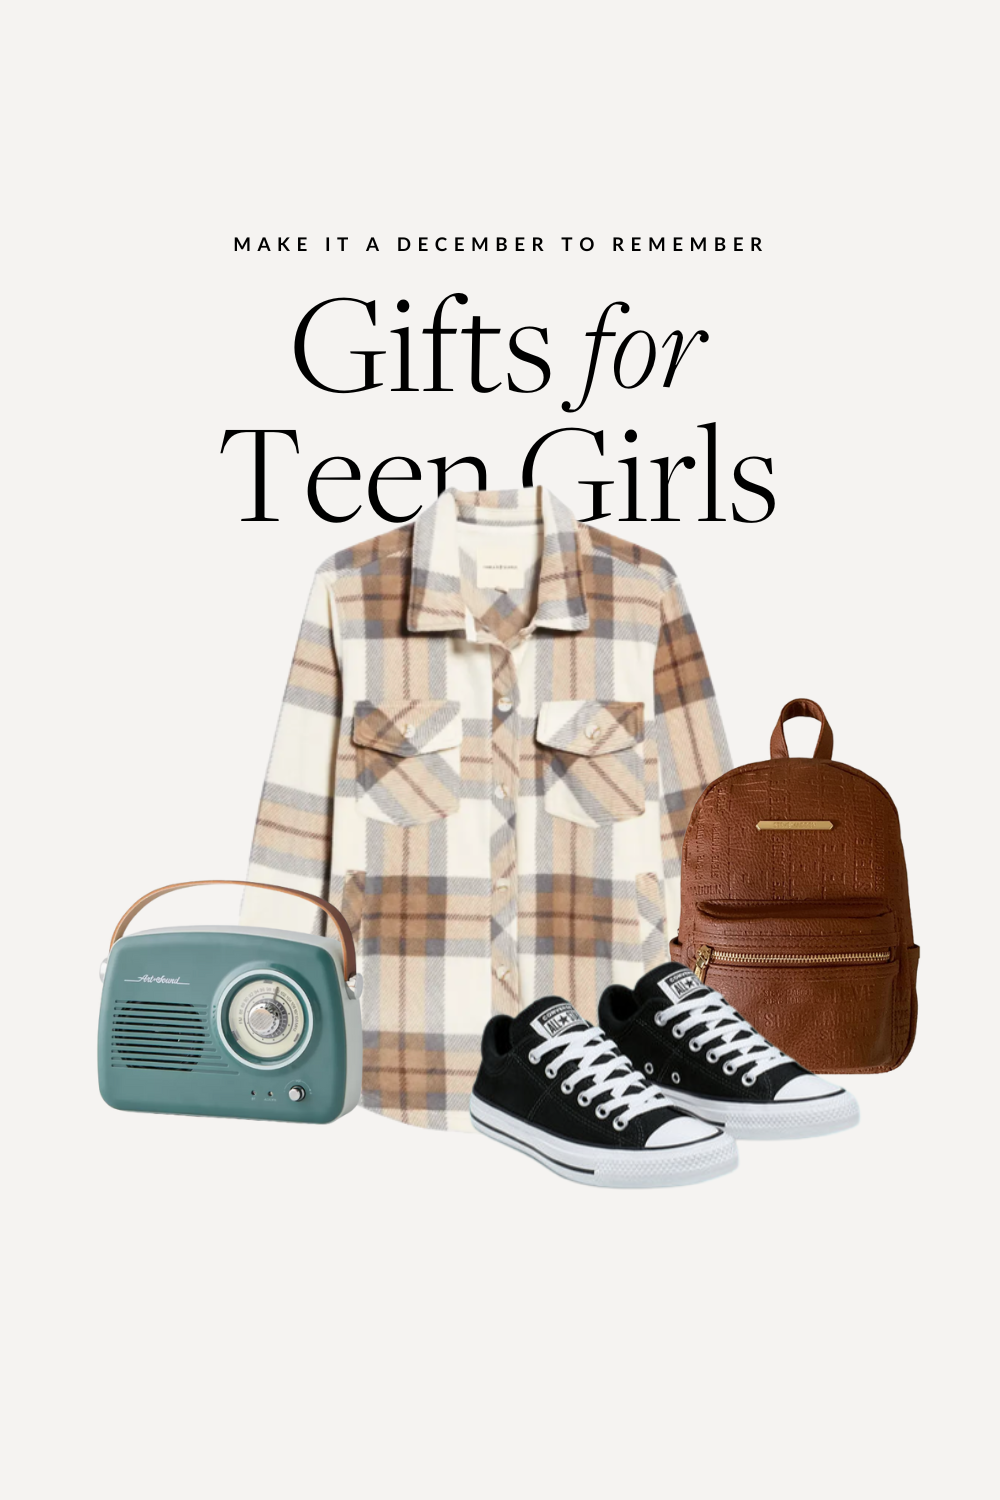 Holiday gift guide & stocking stuffer inspiration for the teen girls this holiday season! It's my 2022 gift guide for teens and I hope you find something you would love to gift this Christmas season! Be sure and catch the full Gift Guide Week over on KaraLayne.com!